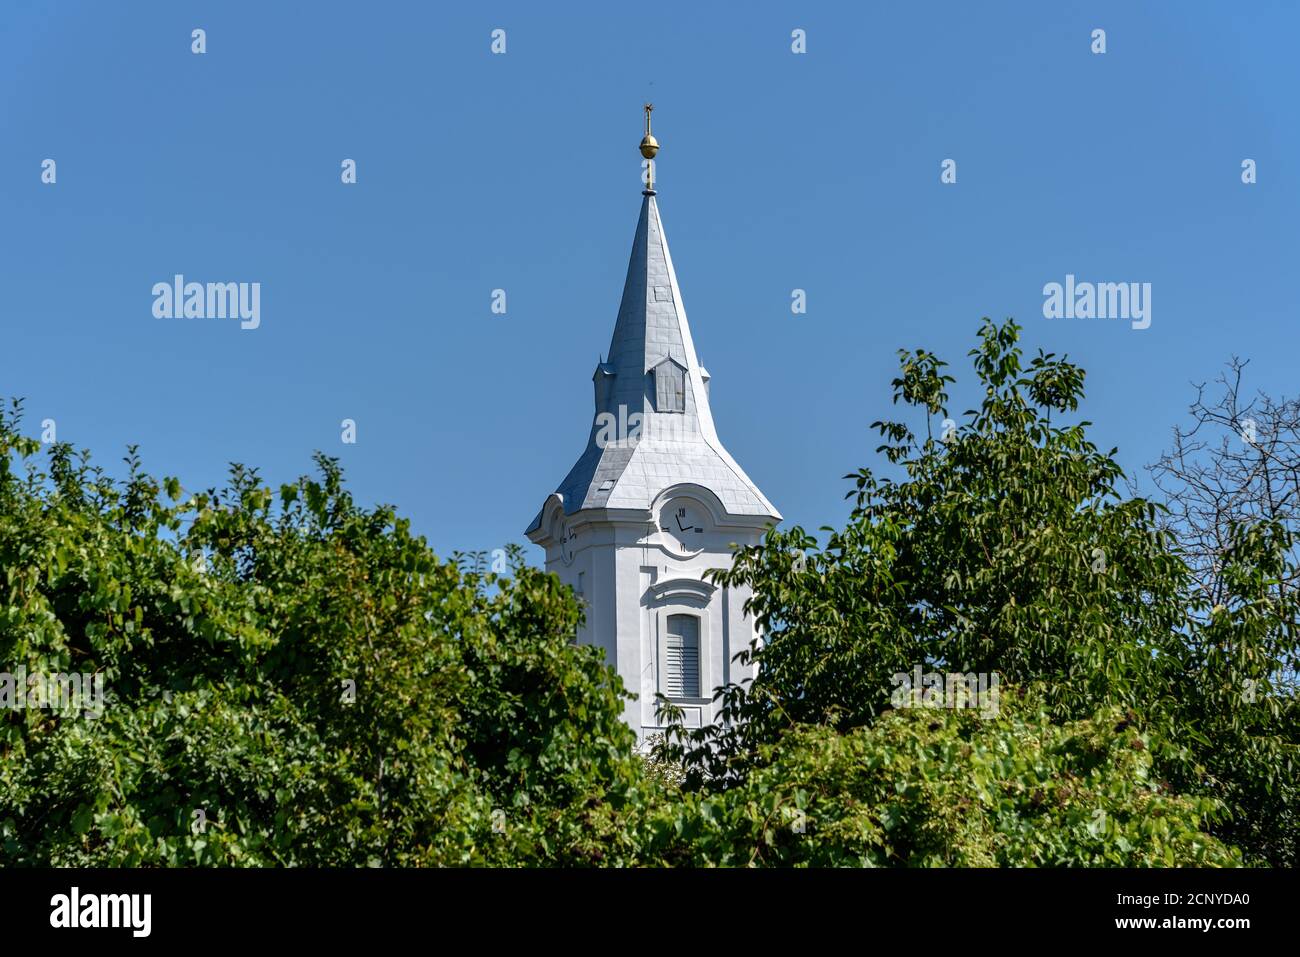 The baroque bell tower of the Reformed Church in Mad, Hungary Stock Photo